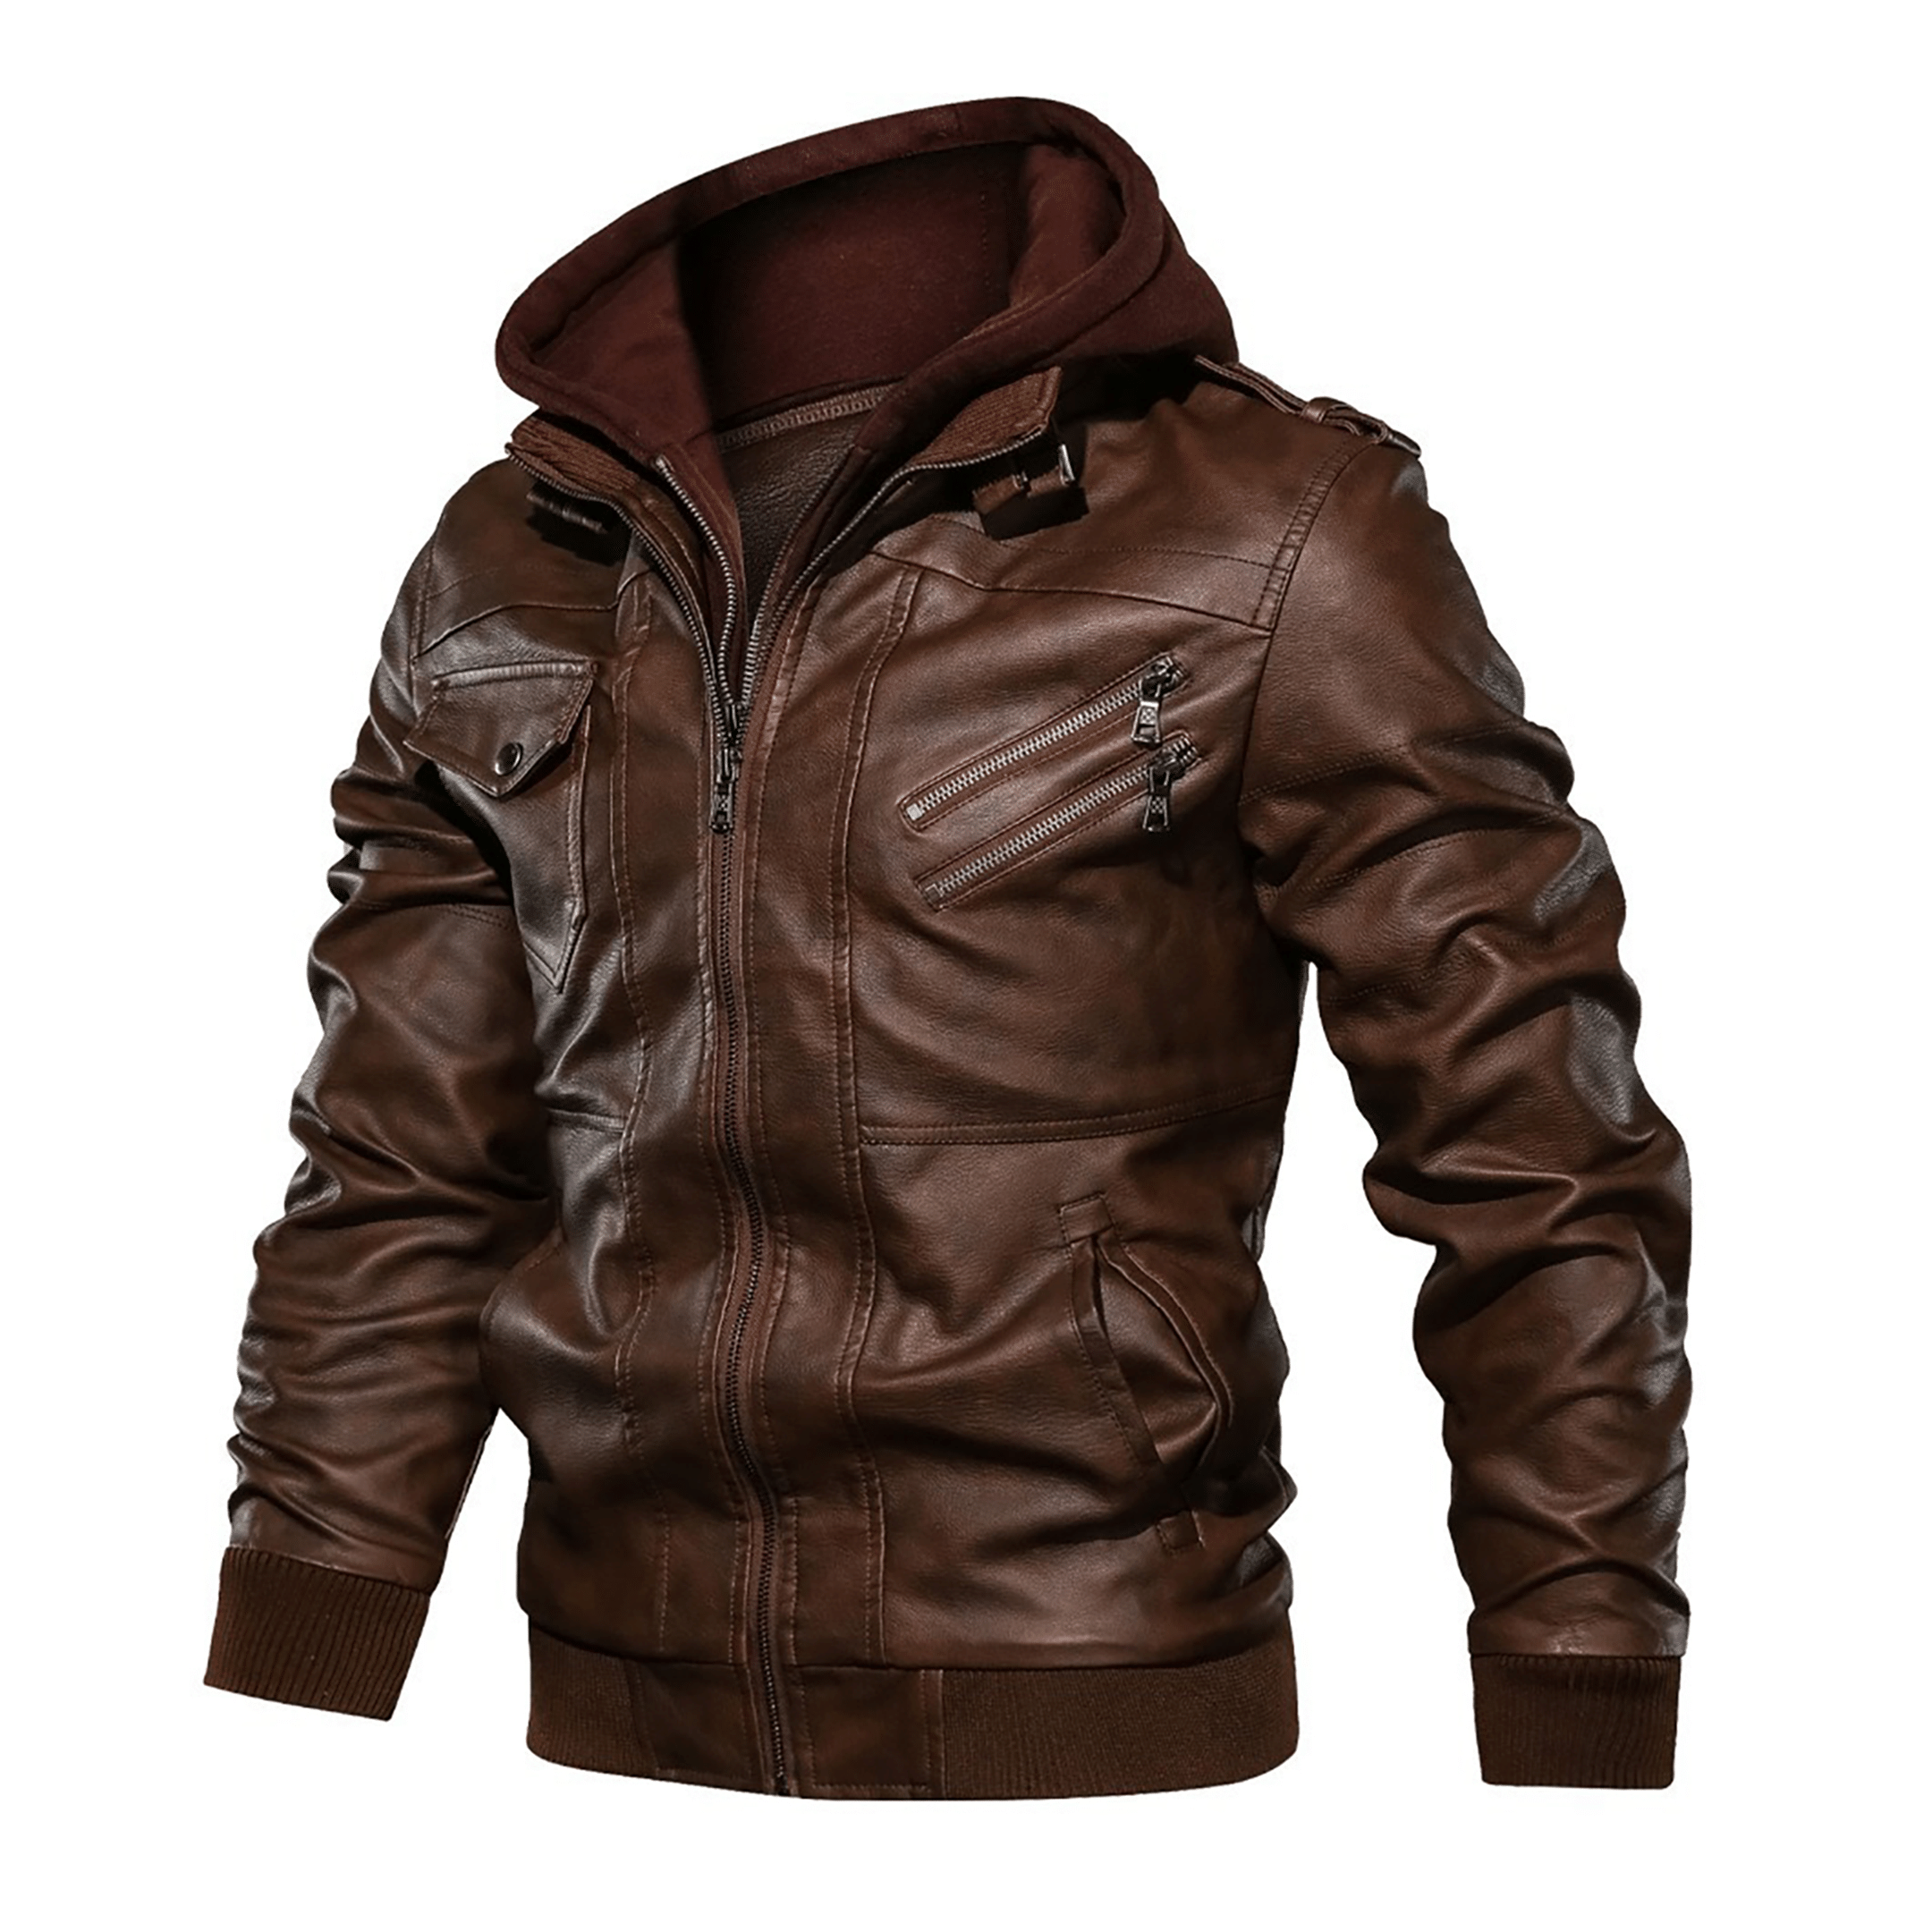 Top leather jackets and latest products 253